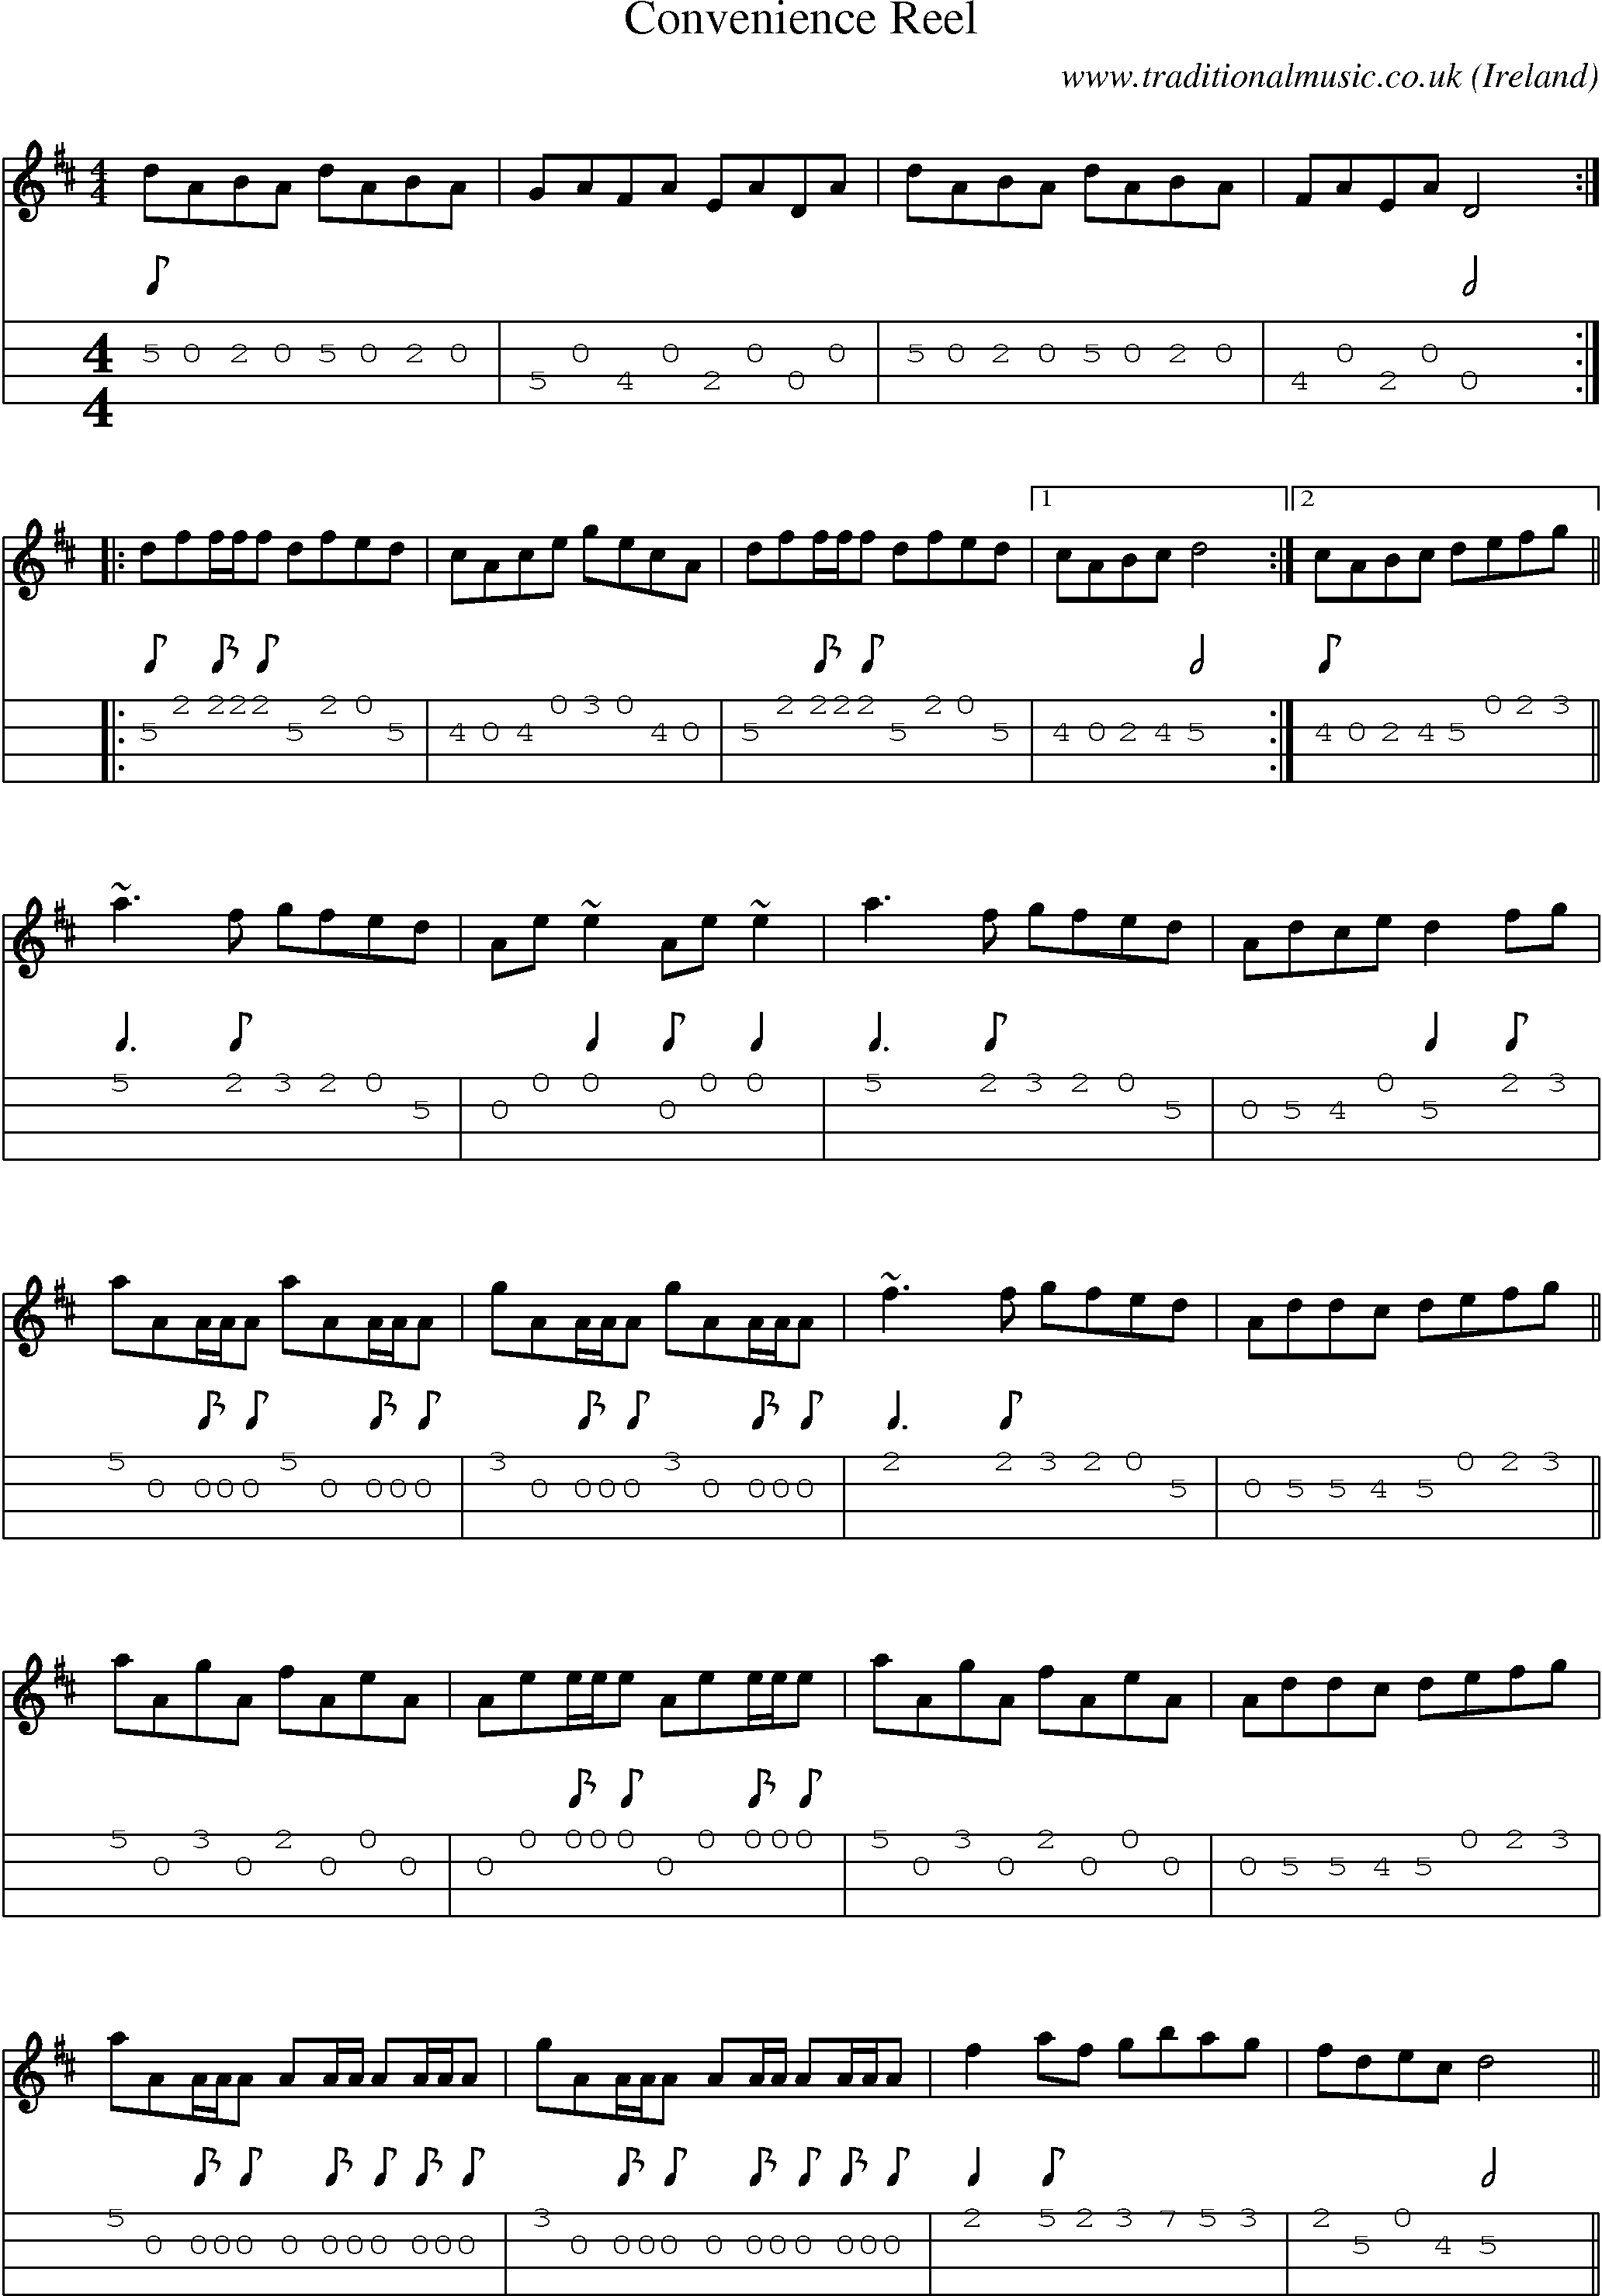 Music Score and Mandolin Tabs for Convenience Reel